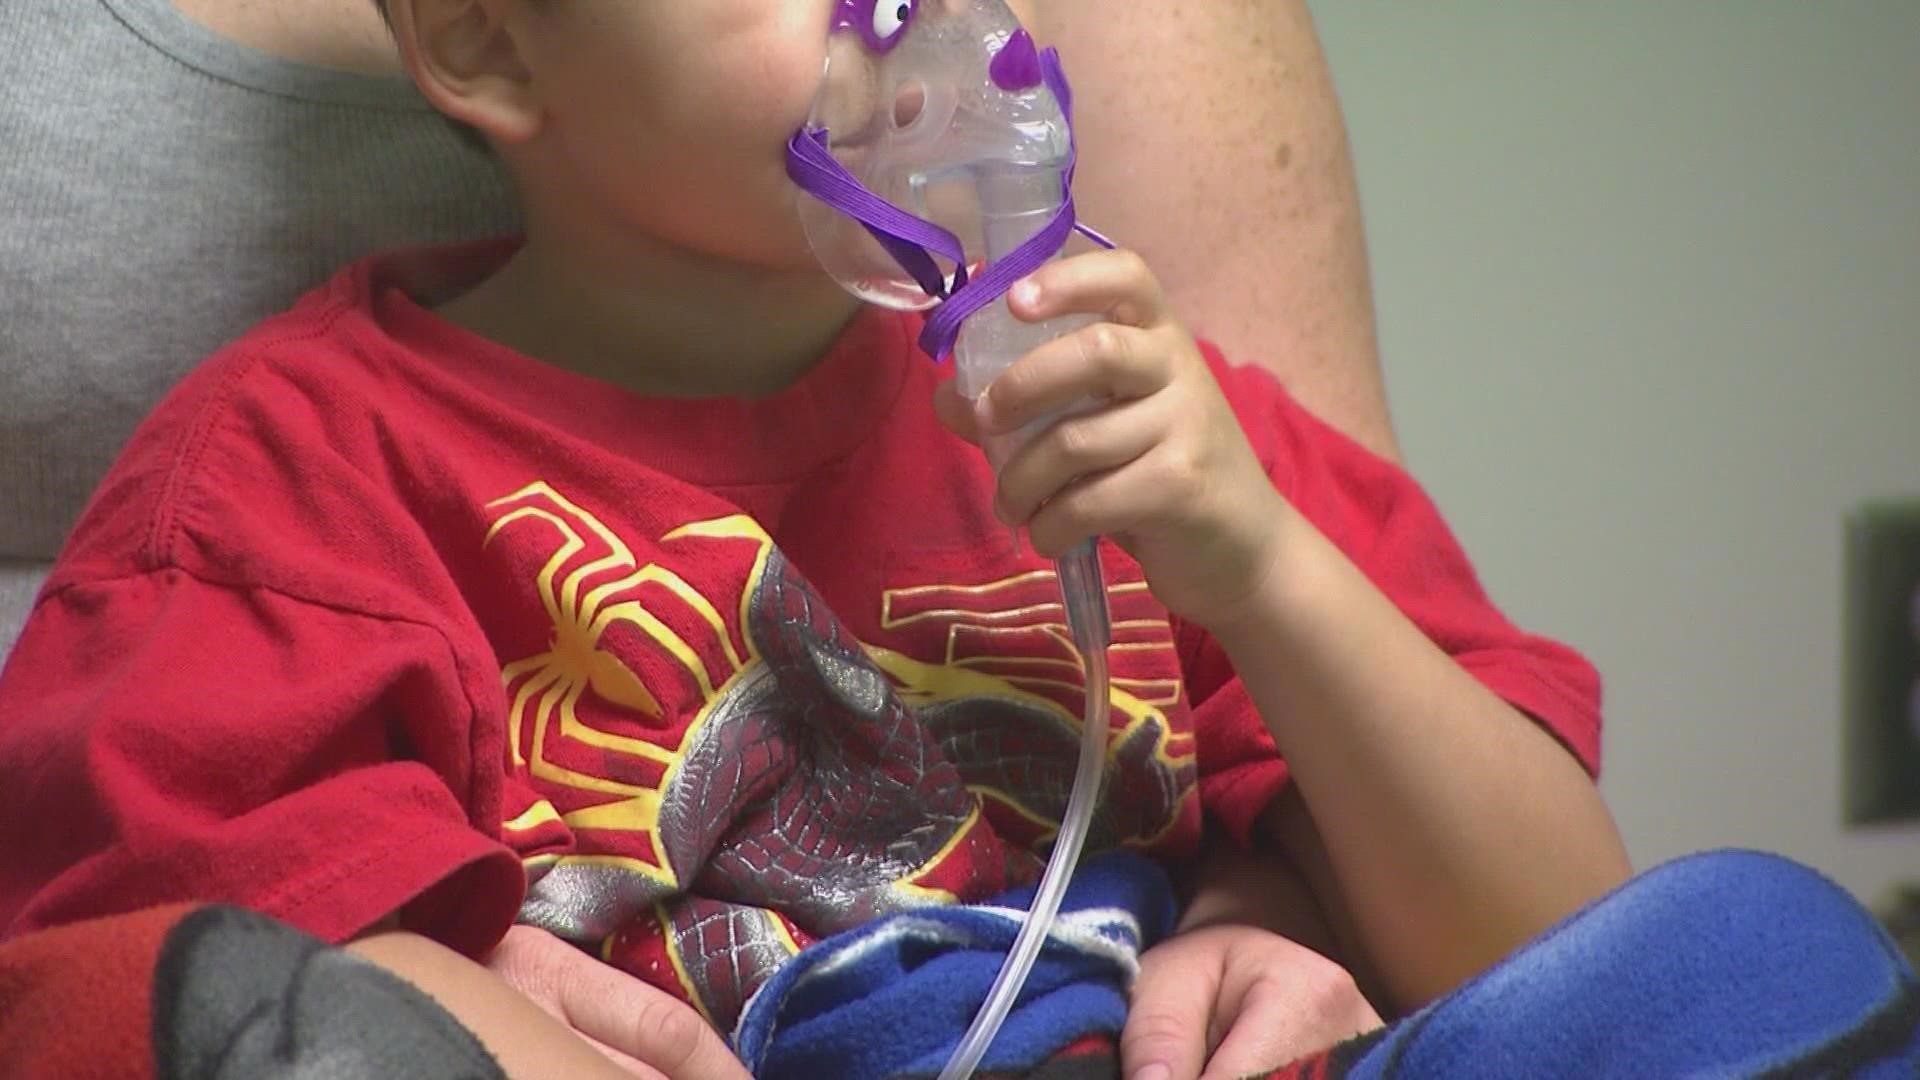 Pediatricians in Seattle and Tacoma are warning that respiratory related illnesses are rising due to viruses such as RSV.